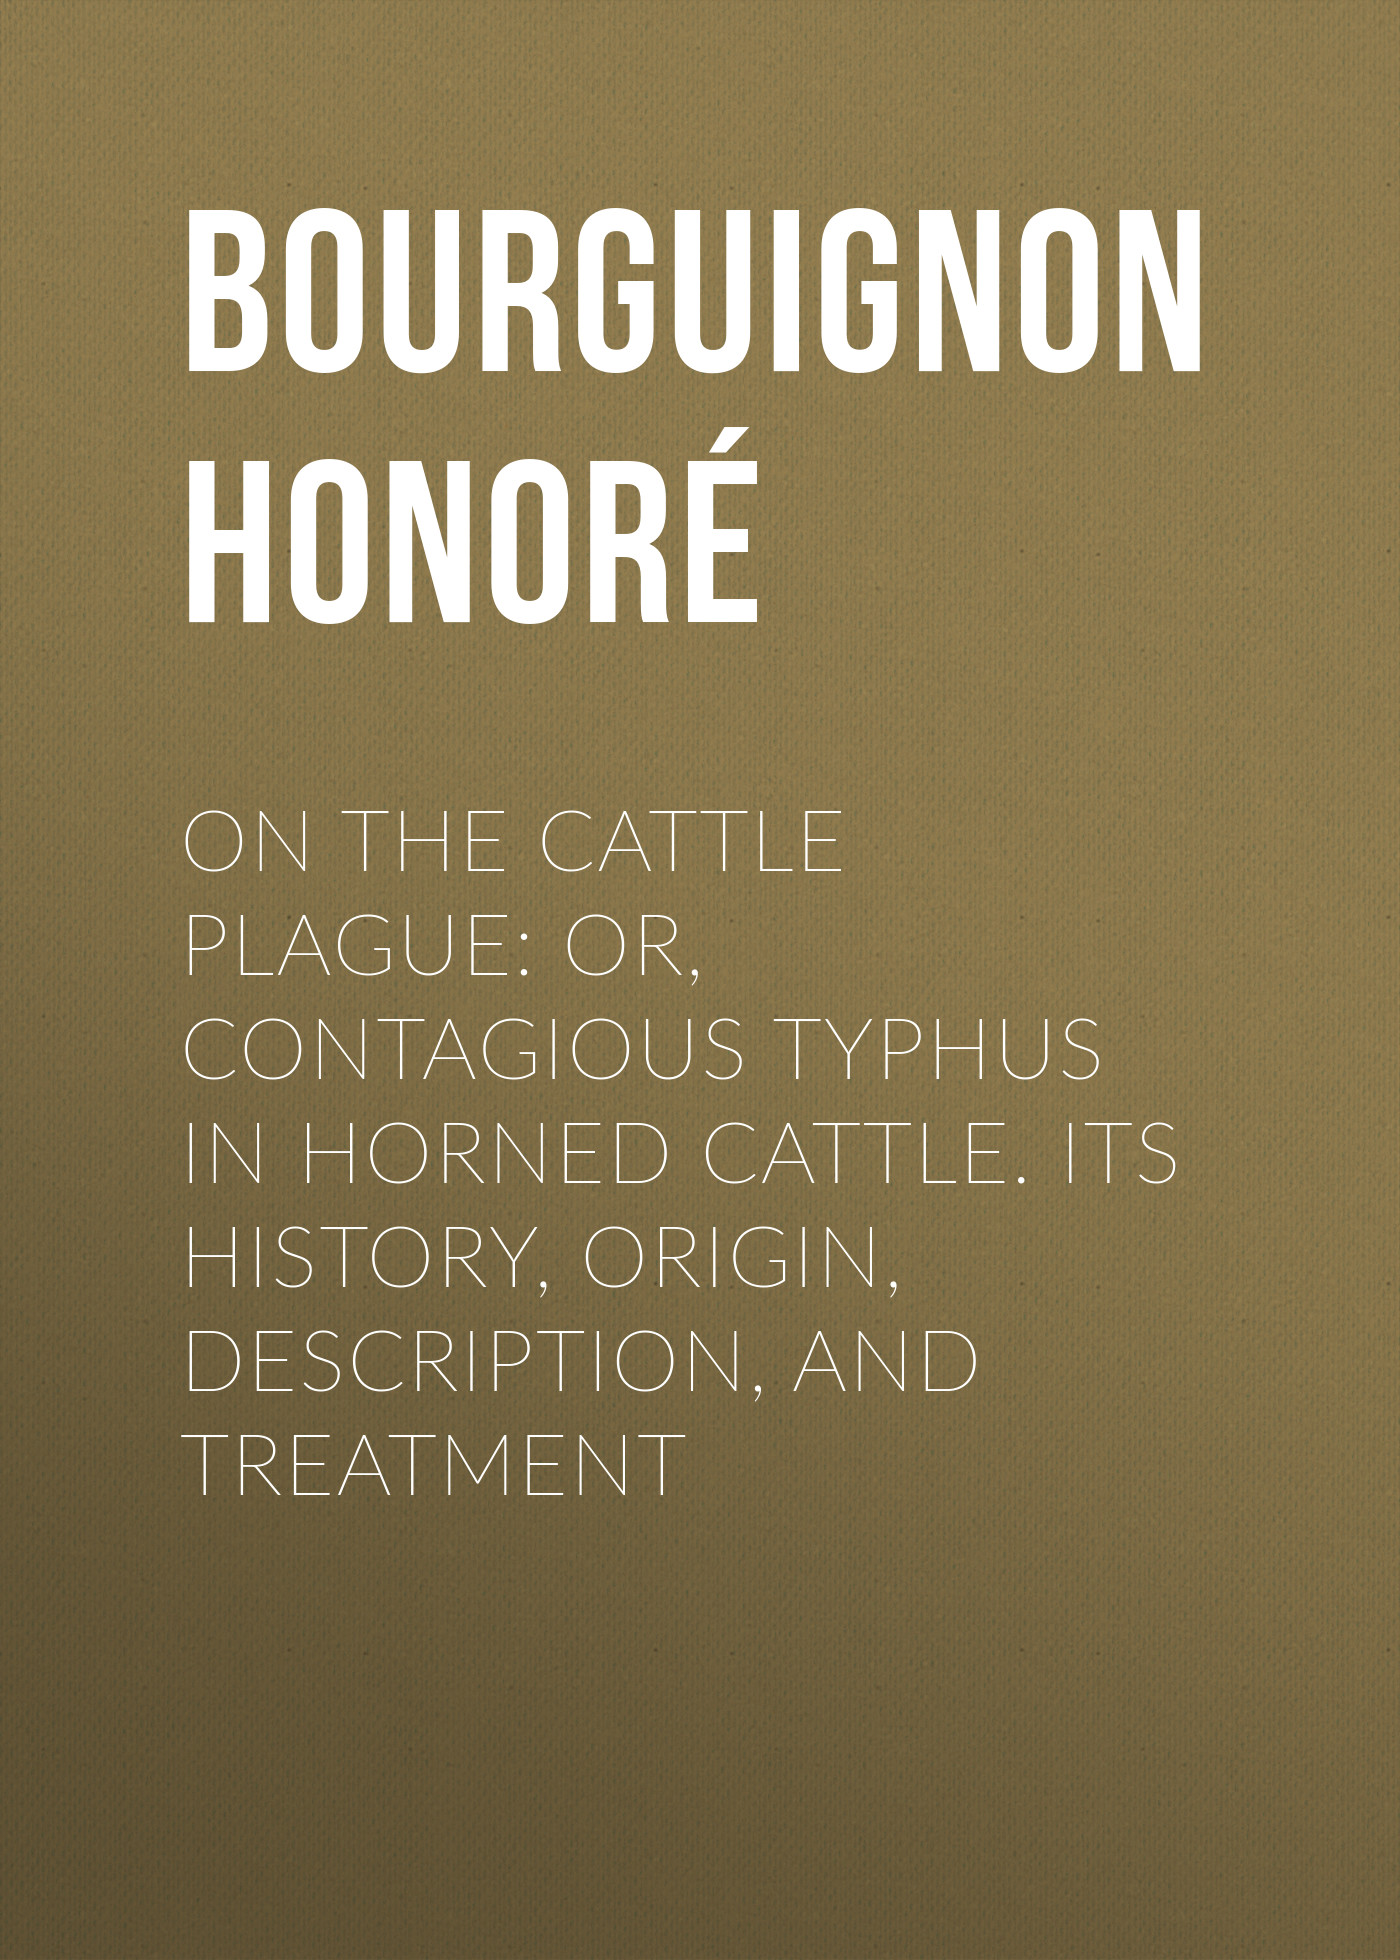 On the cattle plague: or, Contagious typhus in horned cattle. Its history, origin, description, and treatment